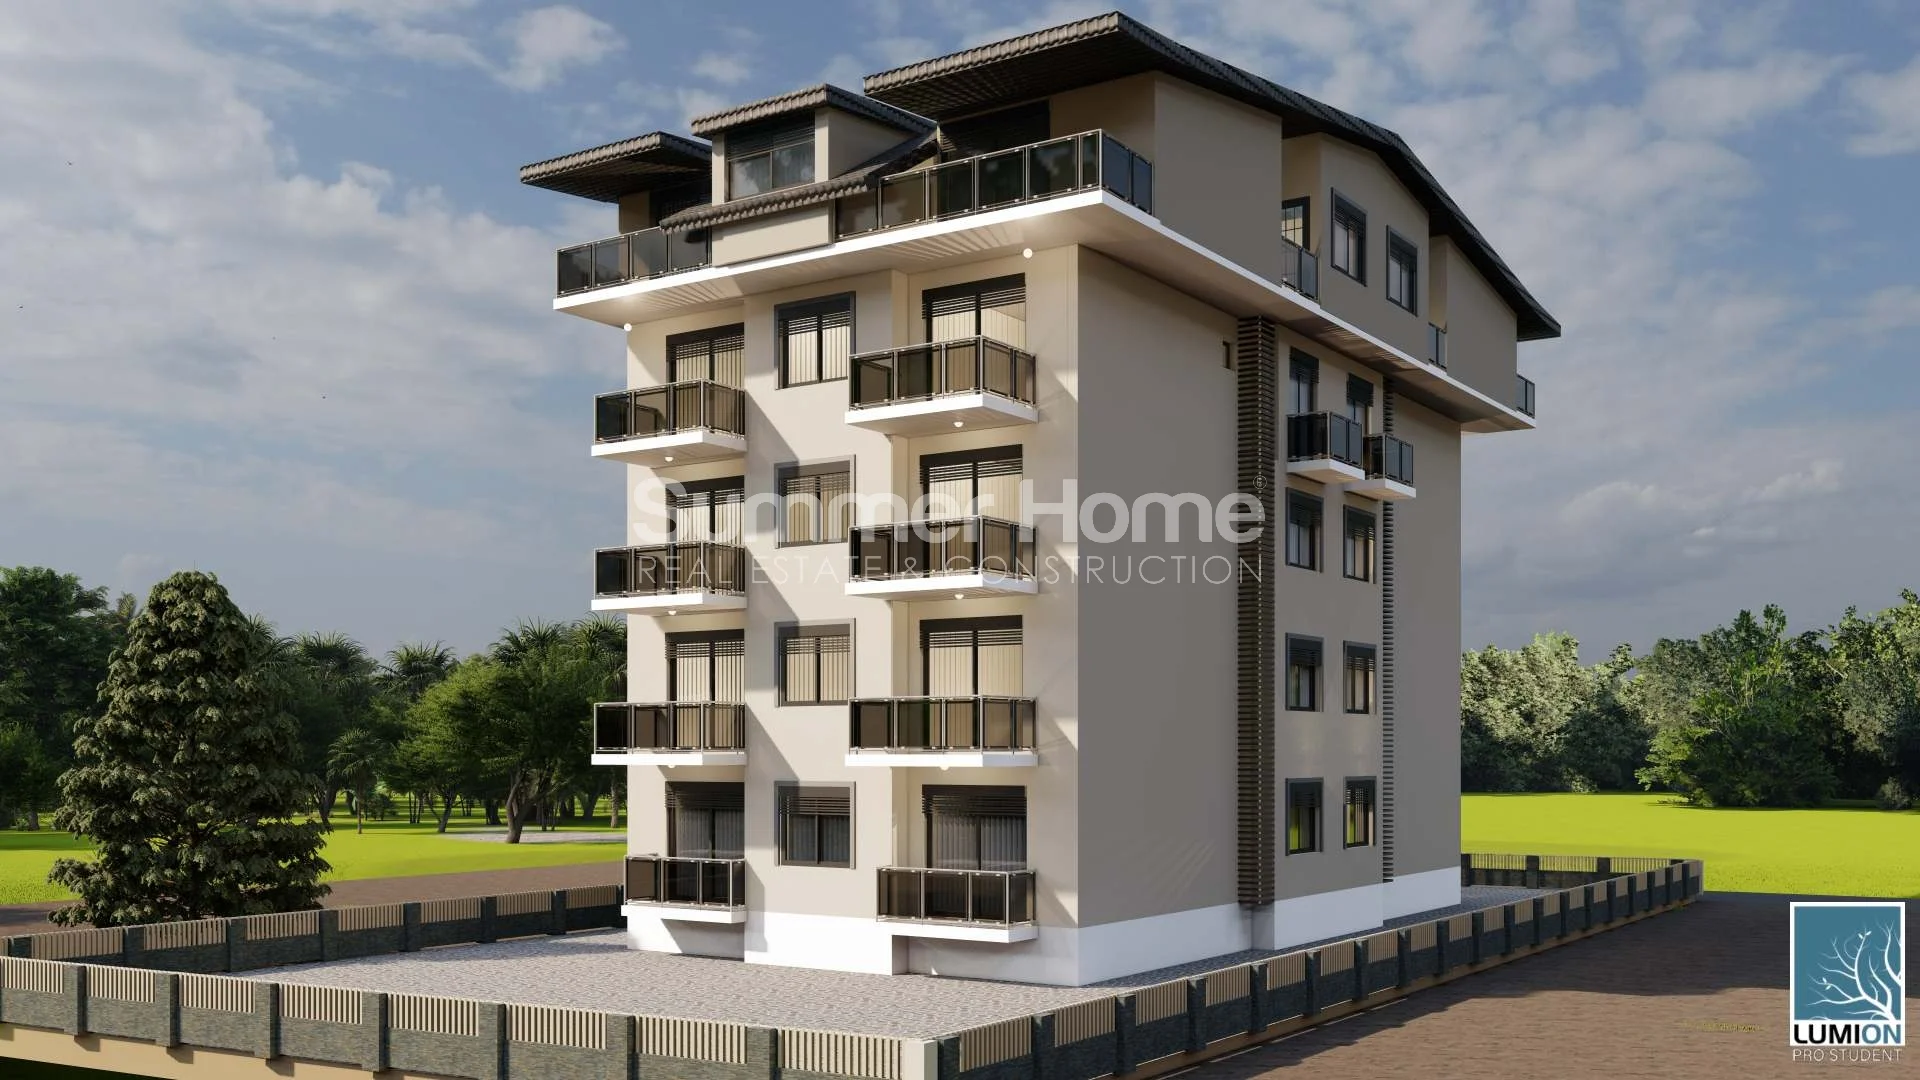 Modern, Chic Apartments For Sale in Gazipasa general - 7